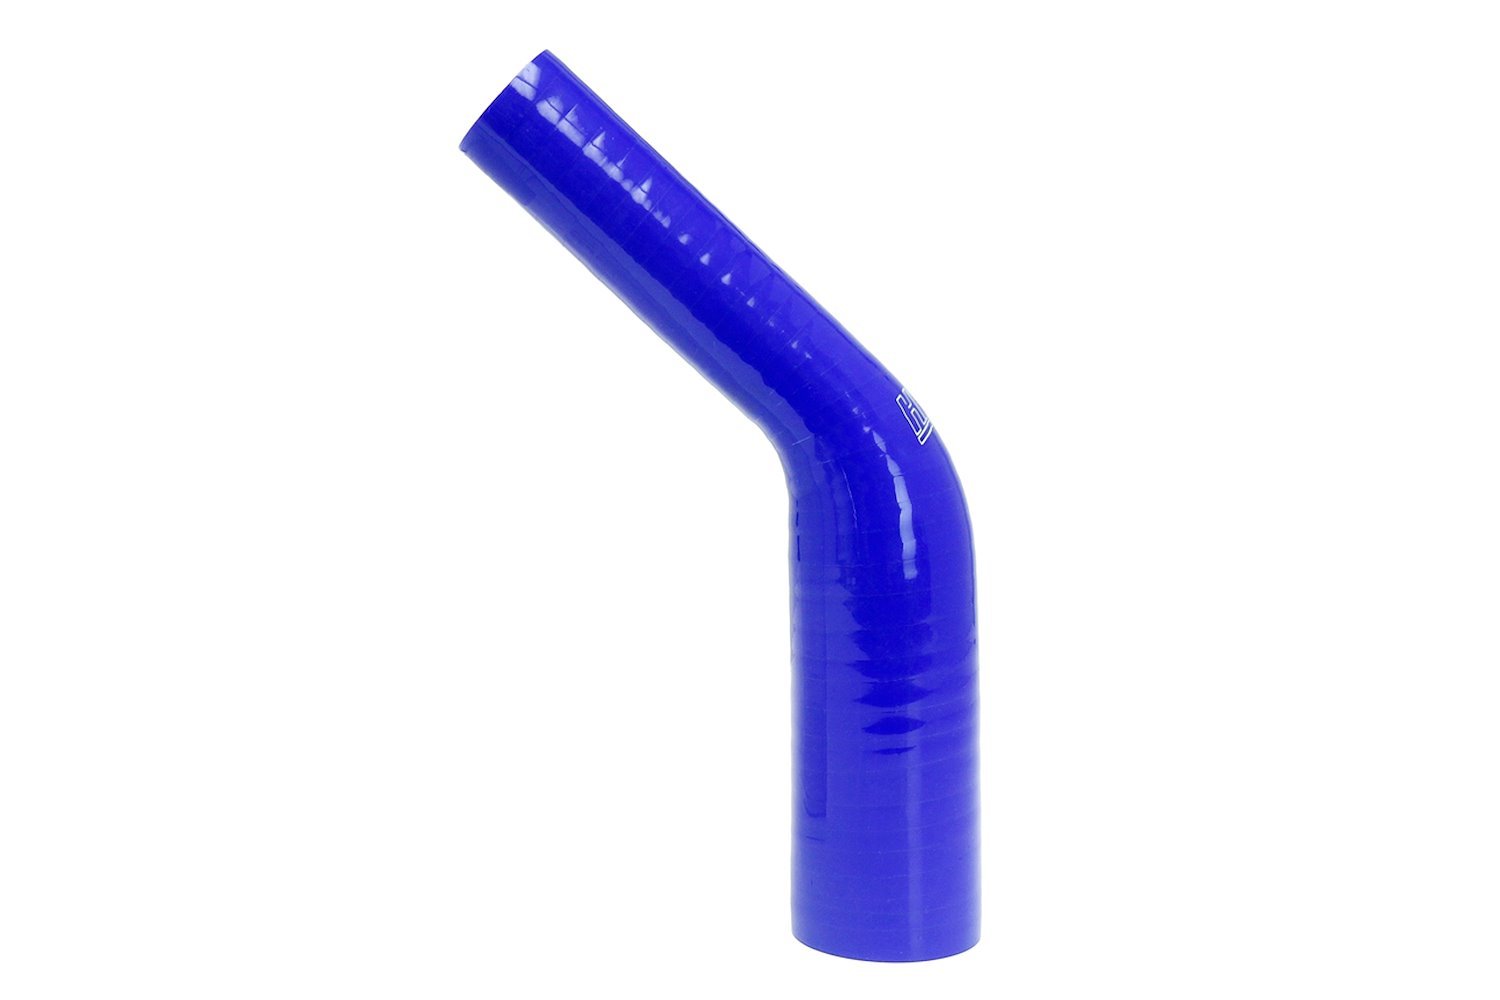 HTSER45-125-150-BLUE Silicone 45-Degree Elbow Hose, High-Temp 4-Ply Reinforced, 1-1/4 in. - 1-1/2 in. ID, Blue